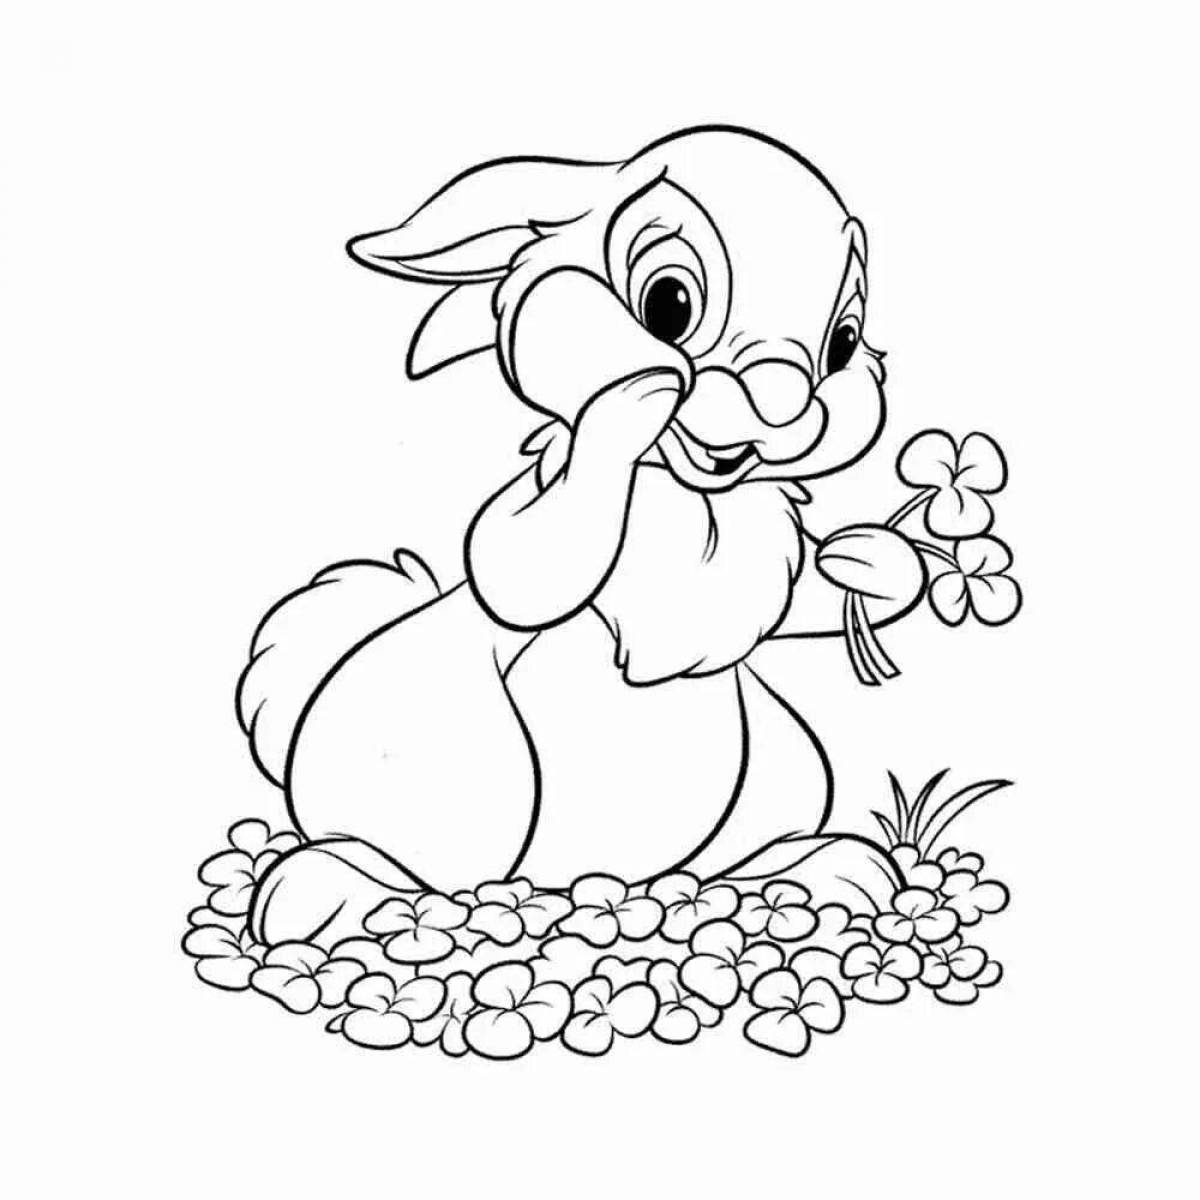 Playful children's coloring download